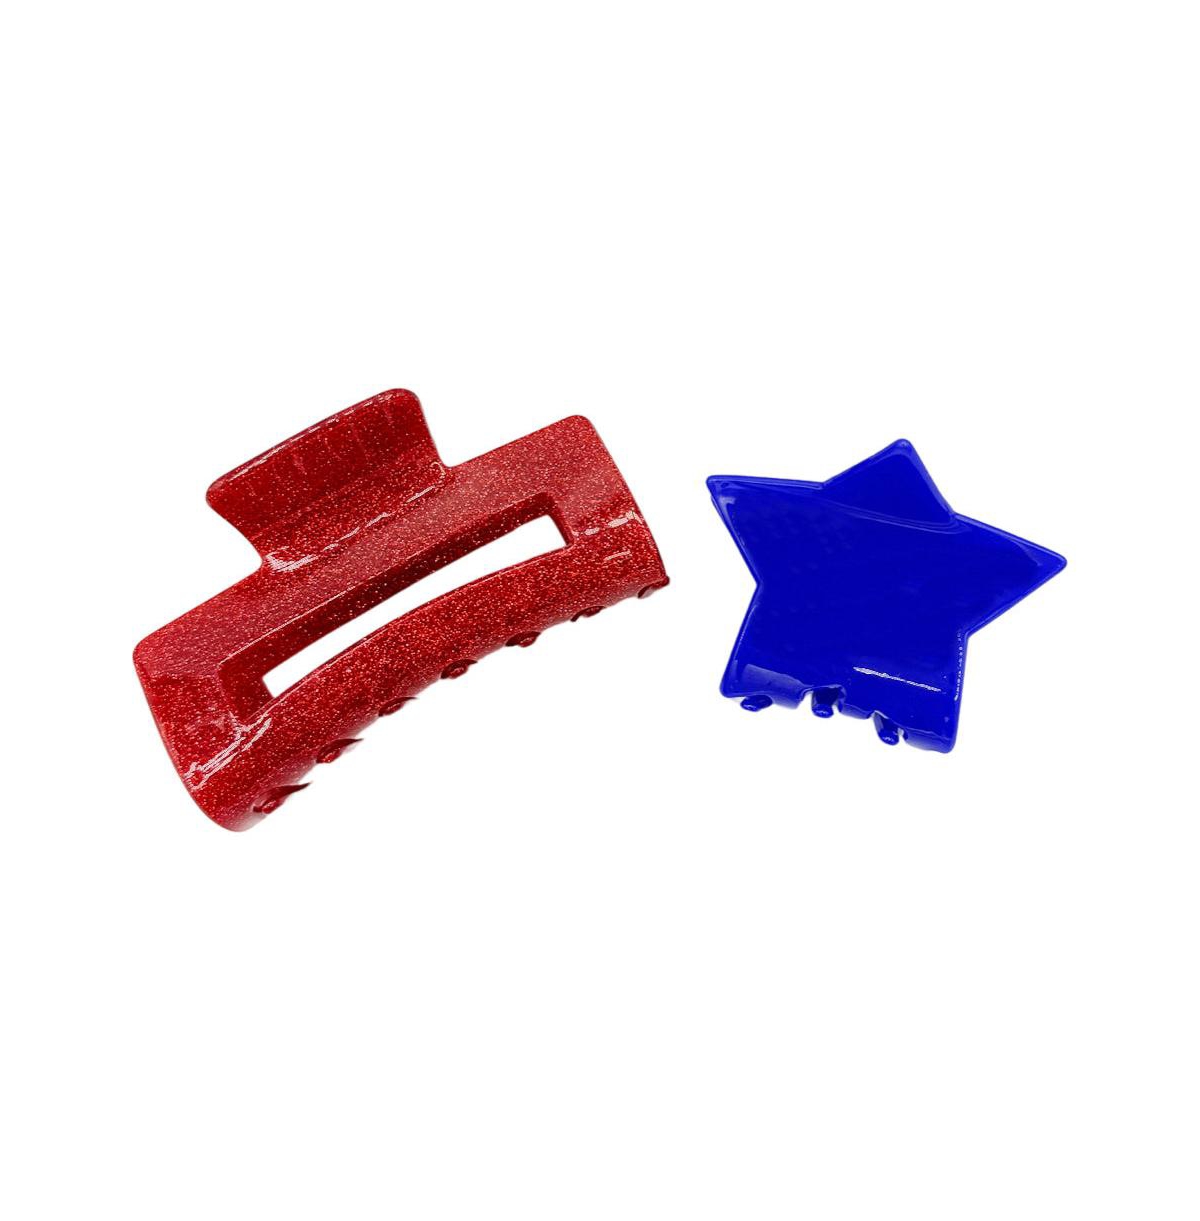 Clip Set - Red + Blue Star - Assorted pre-pack